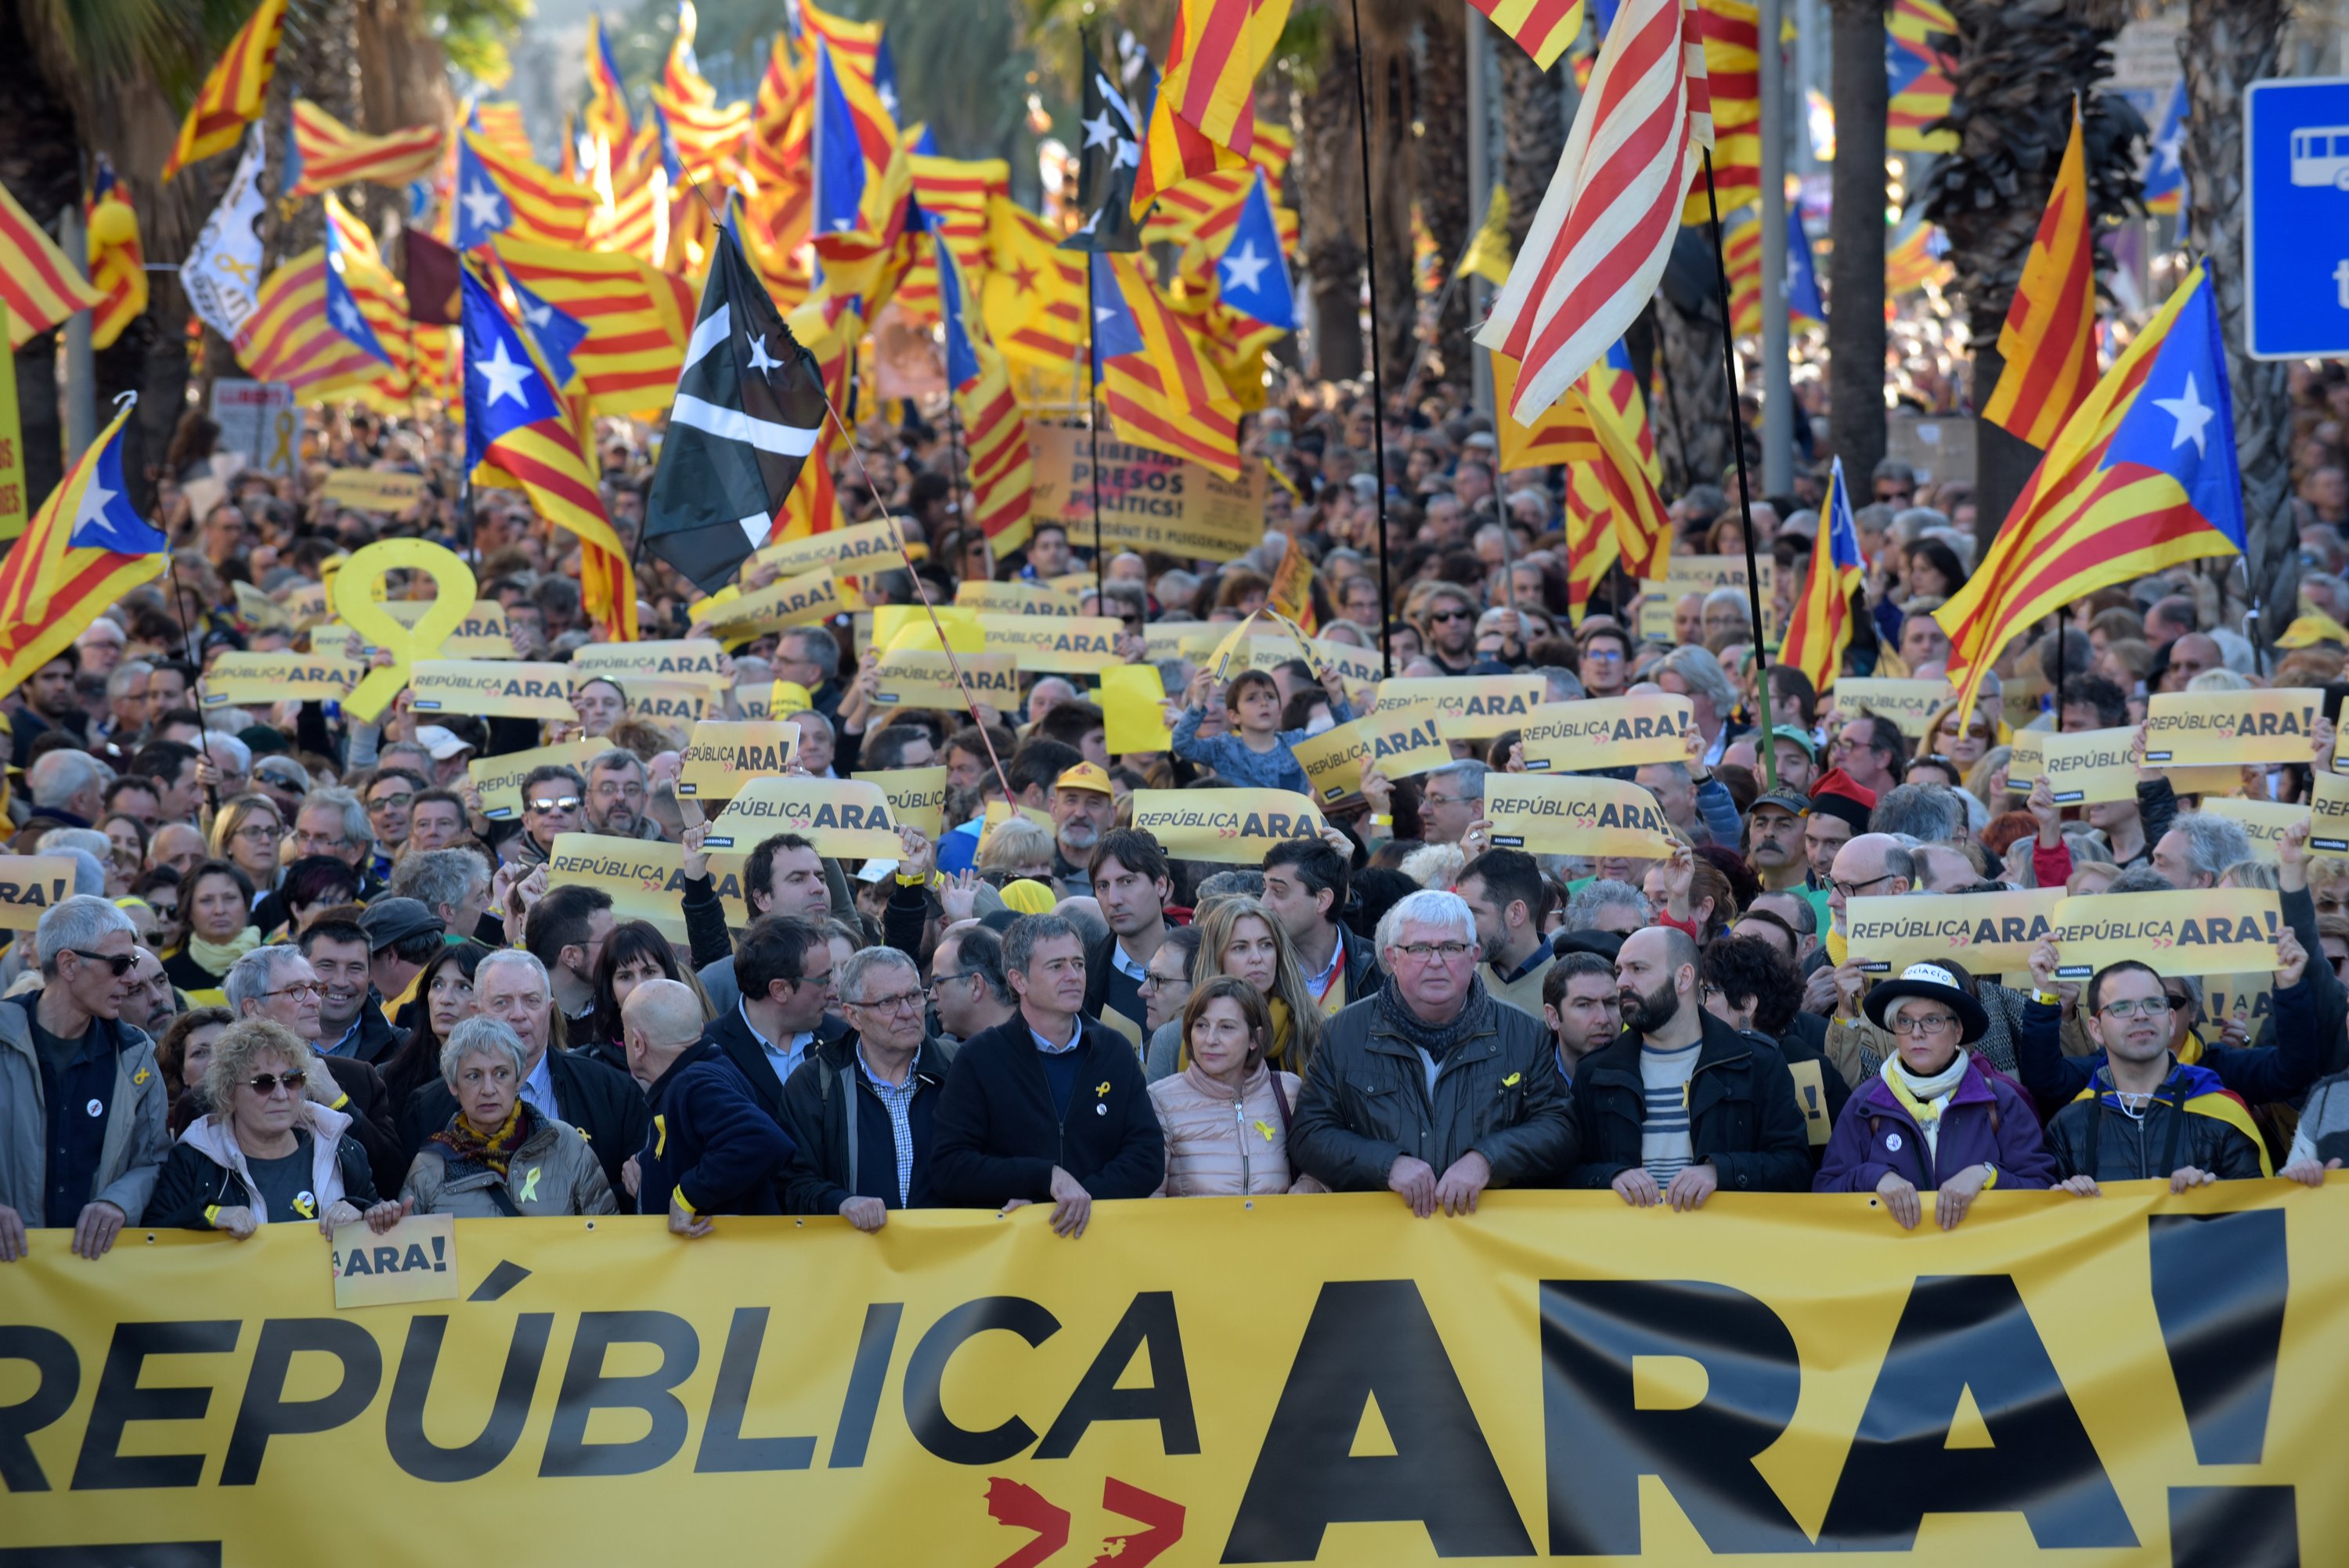 Independence march demands a new Catalan government to implement the Republic